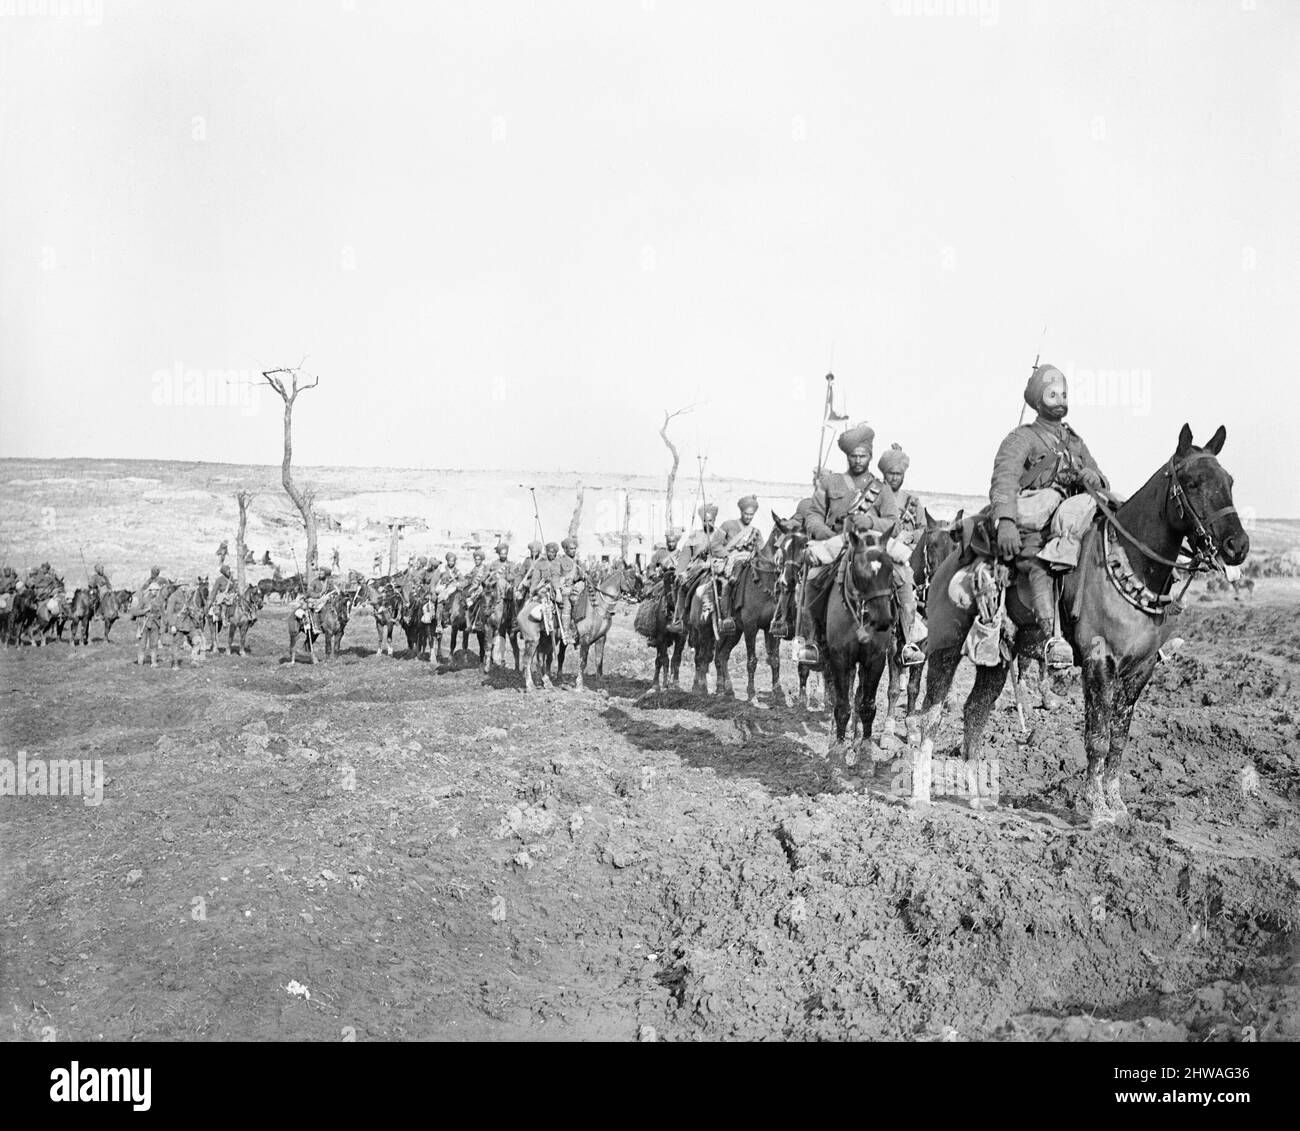 Troops of the 29th Lancers Regiment (Deccan Horse) near Pys, armed with lances and making their way through a shell torn landscape, March 1917. Stock Photo